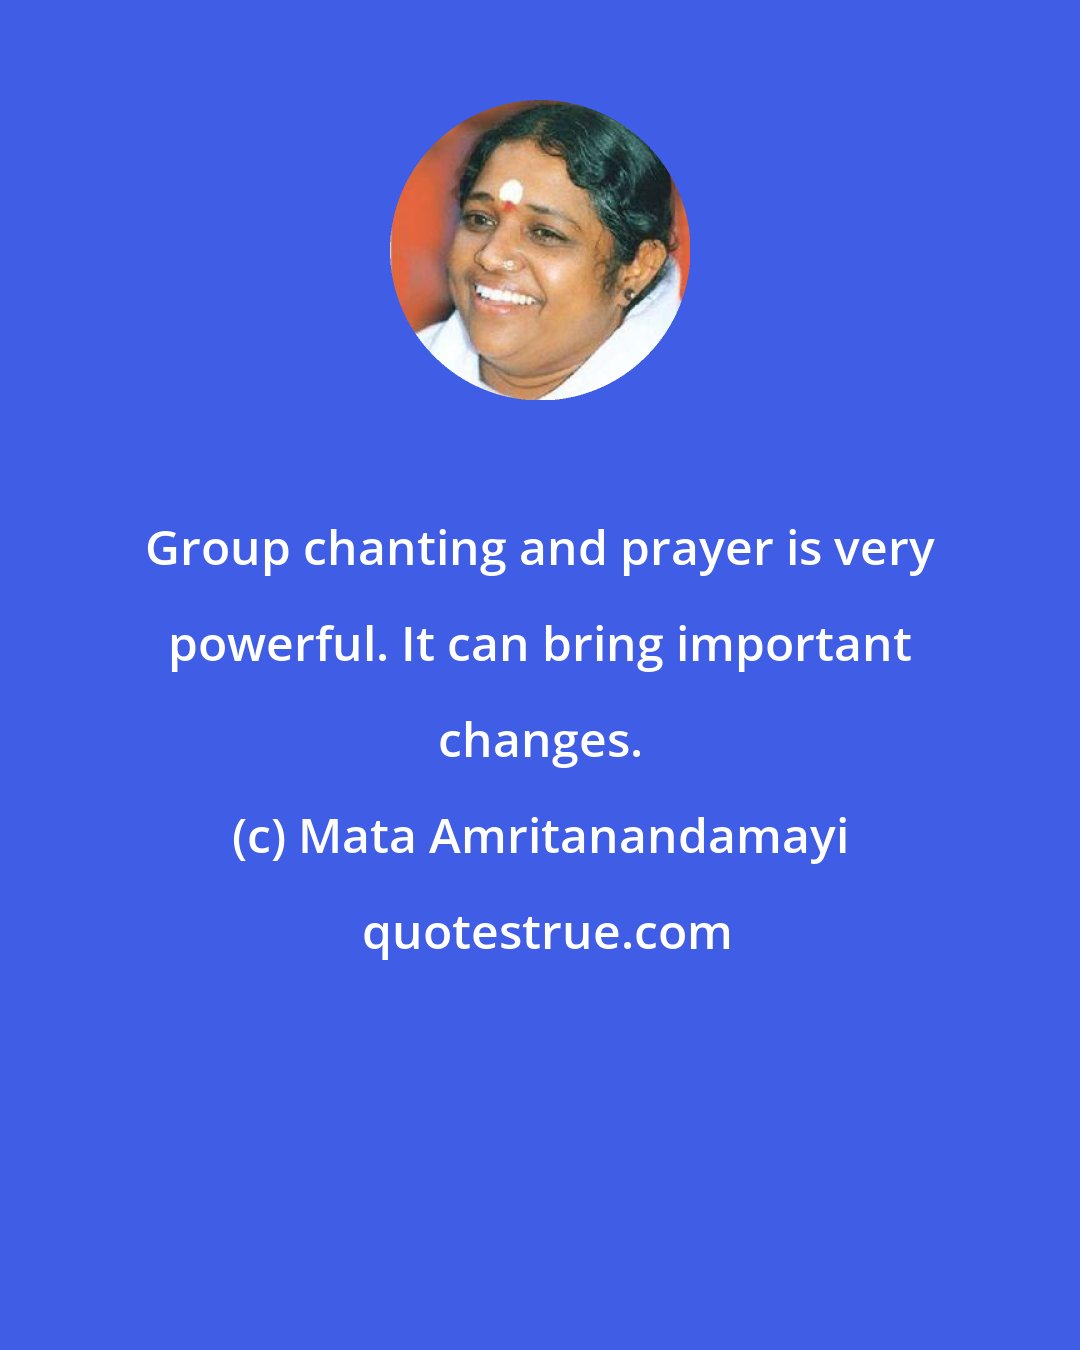 Mata Amritanandamayi: Group chanting and prayer is very powerful. It can bring important changes.